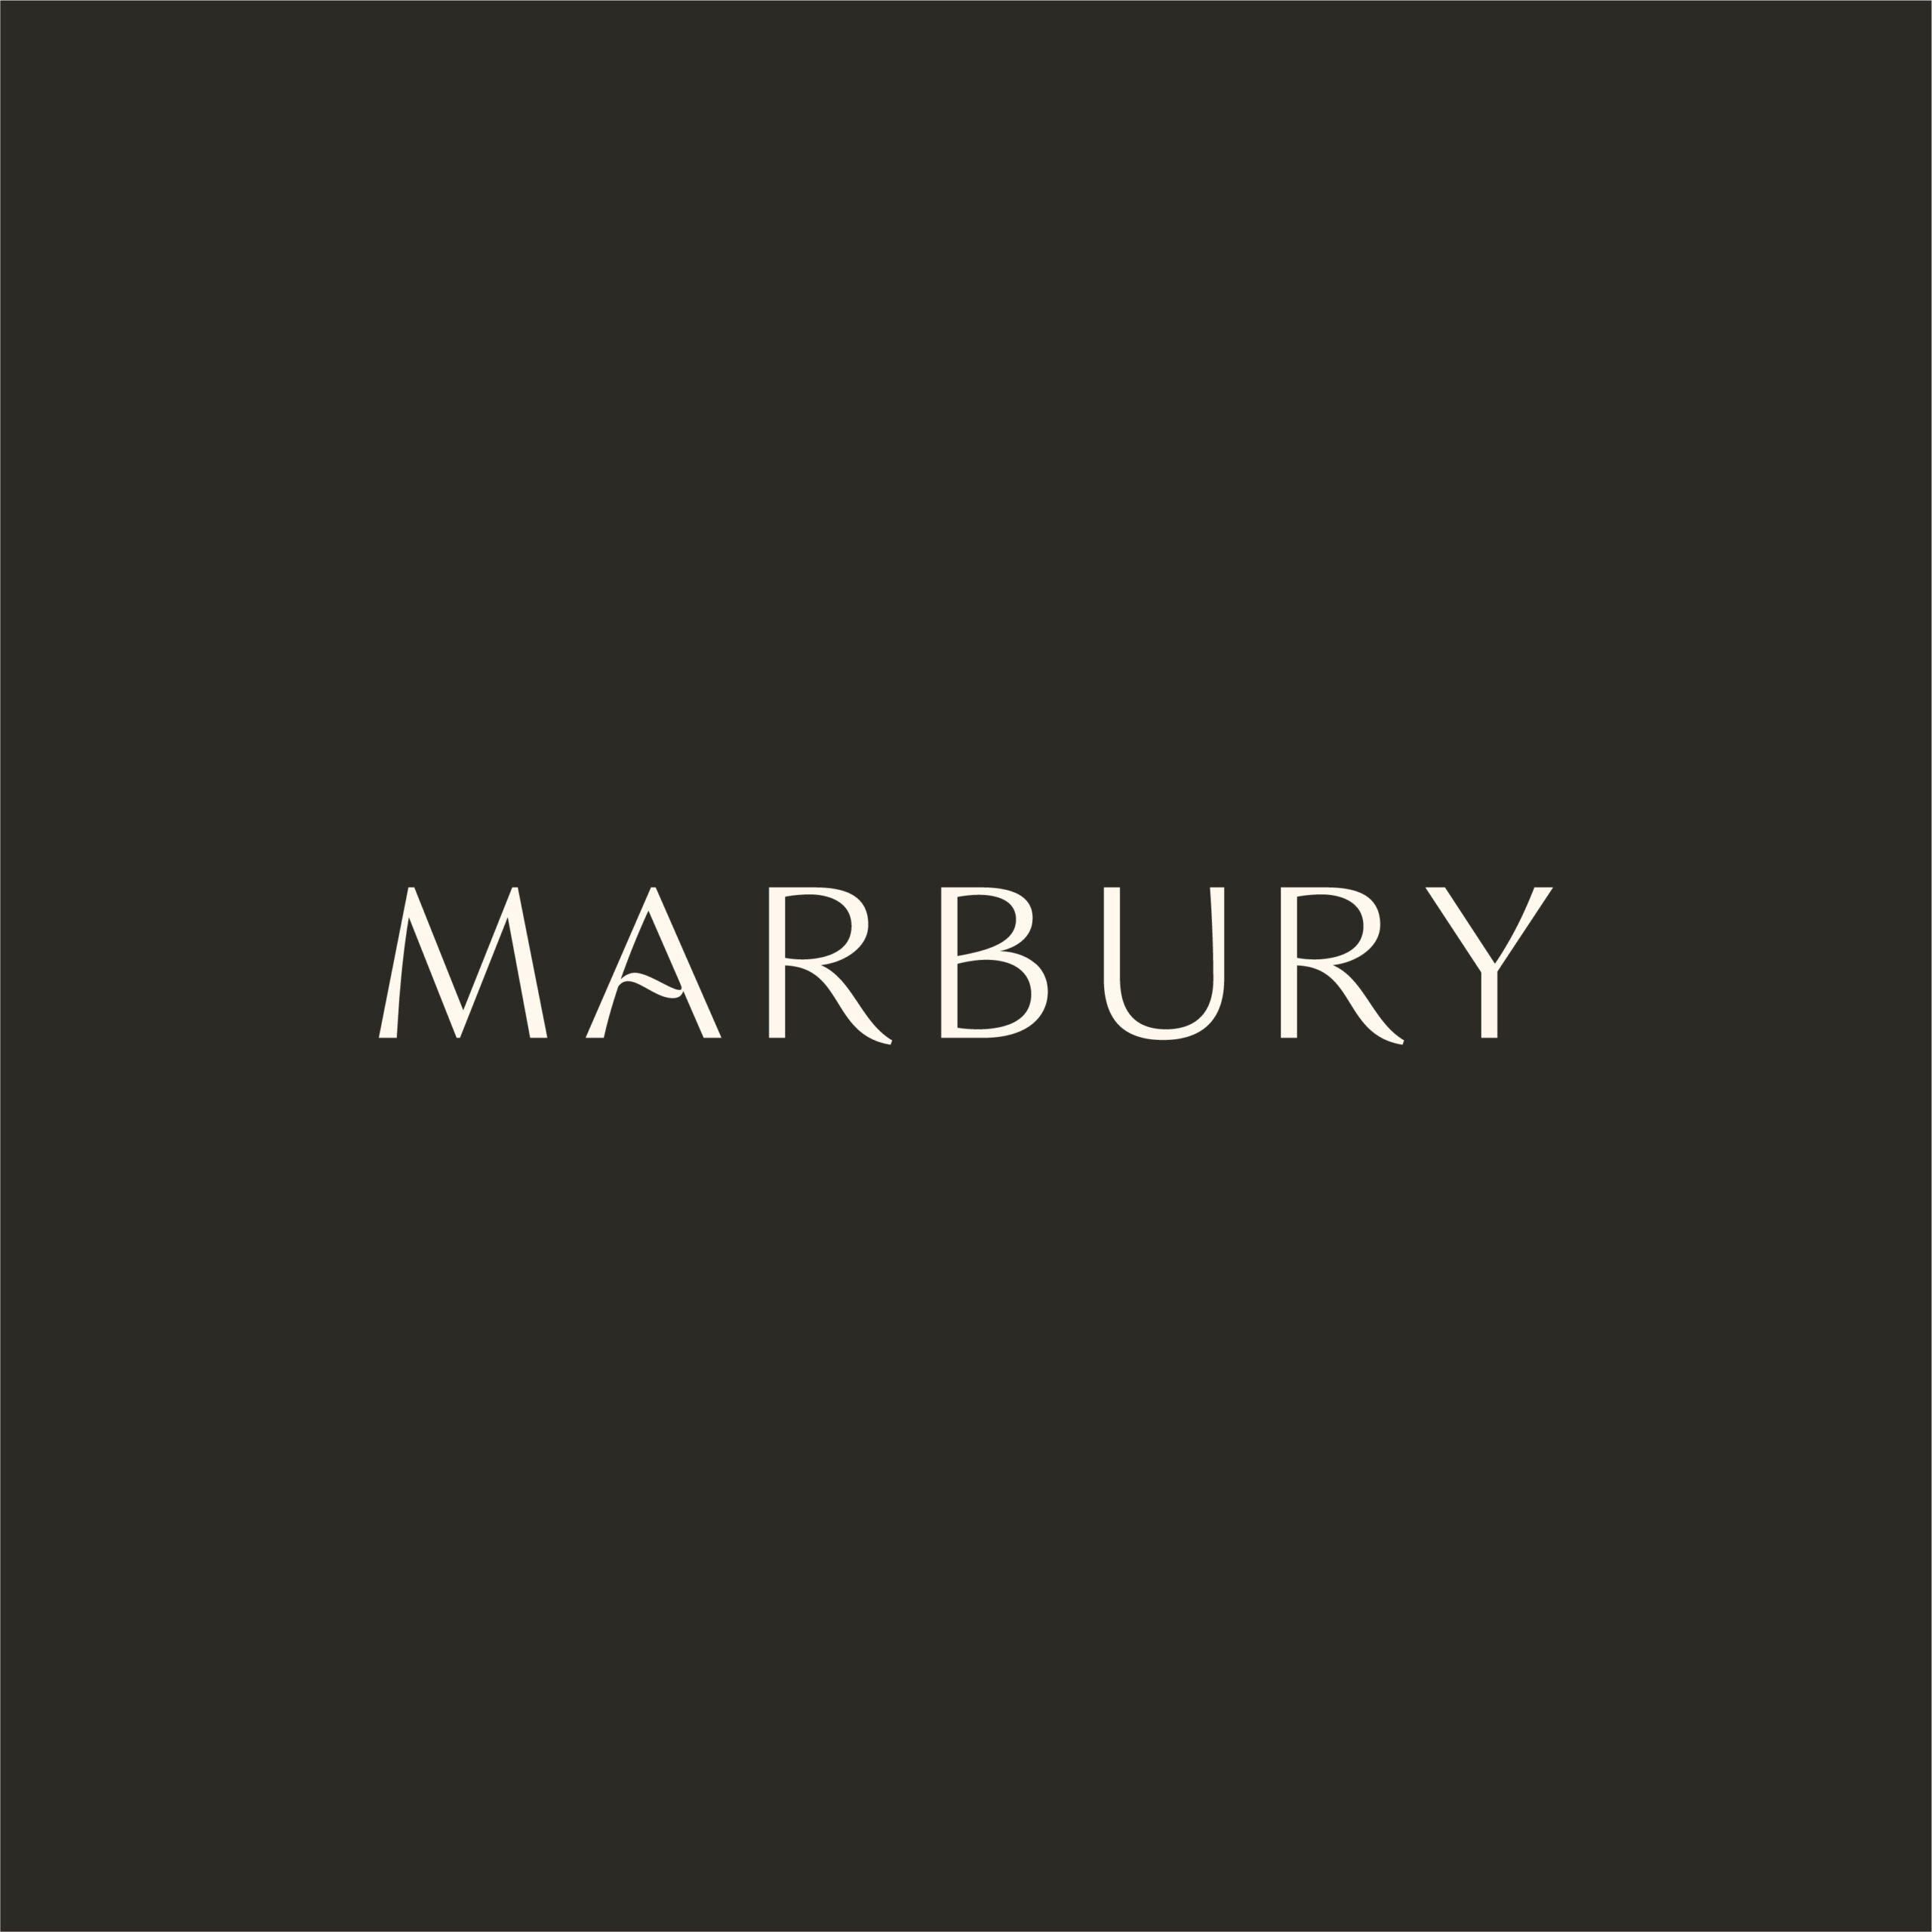 About | Marbury | Boutique Branding Agency